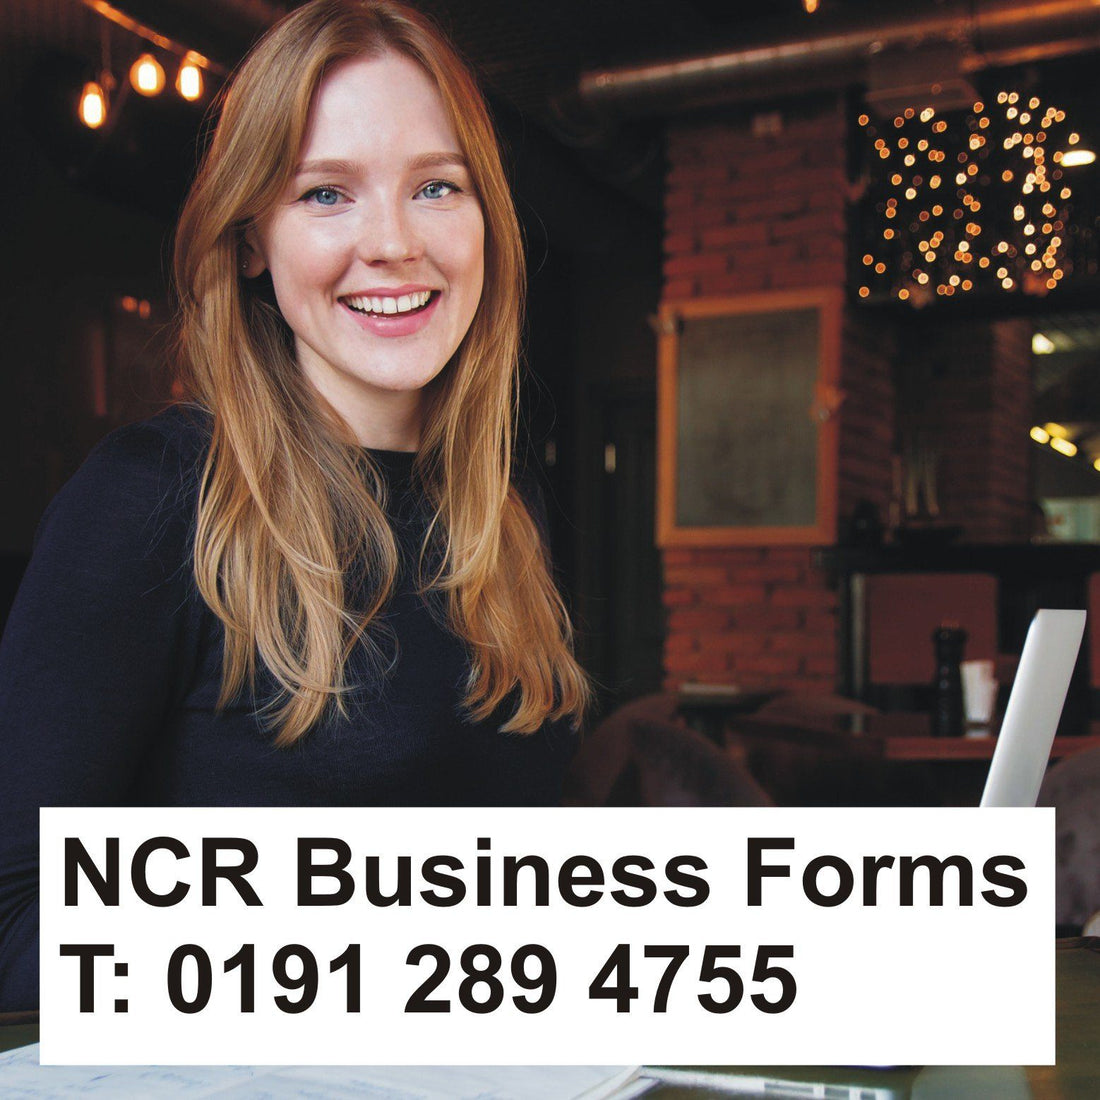 NCR Business Forms Newcastle